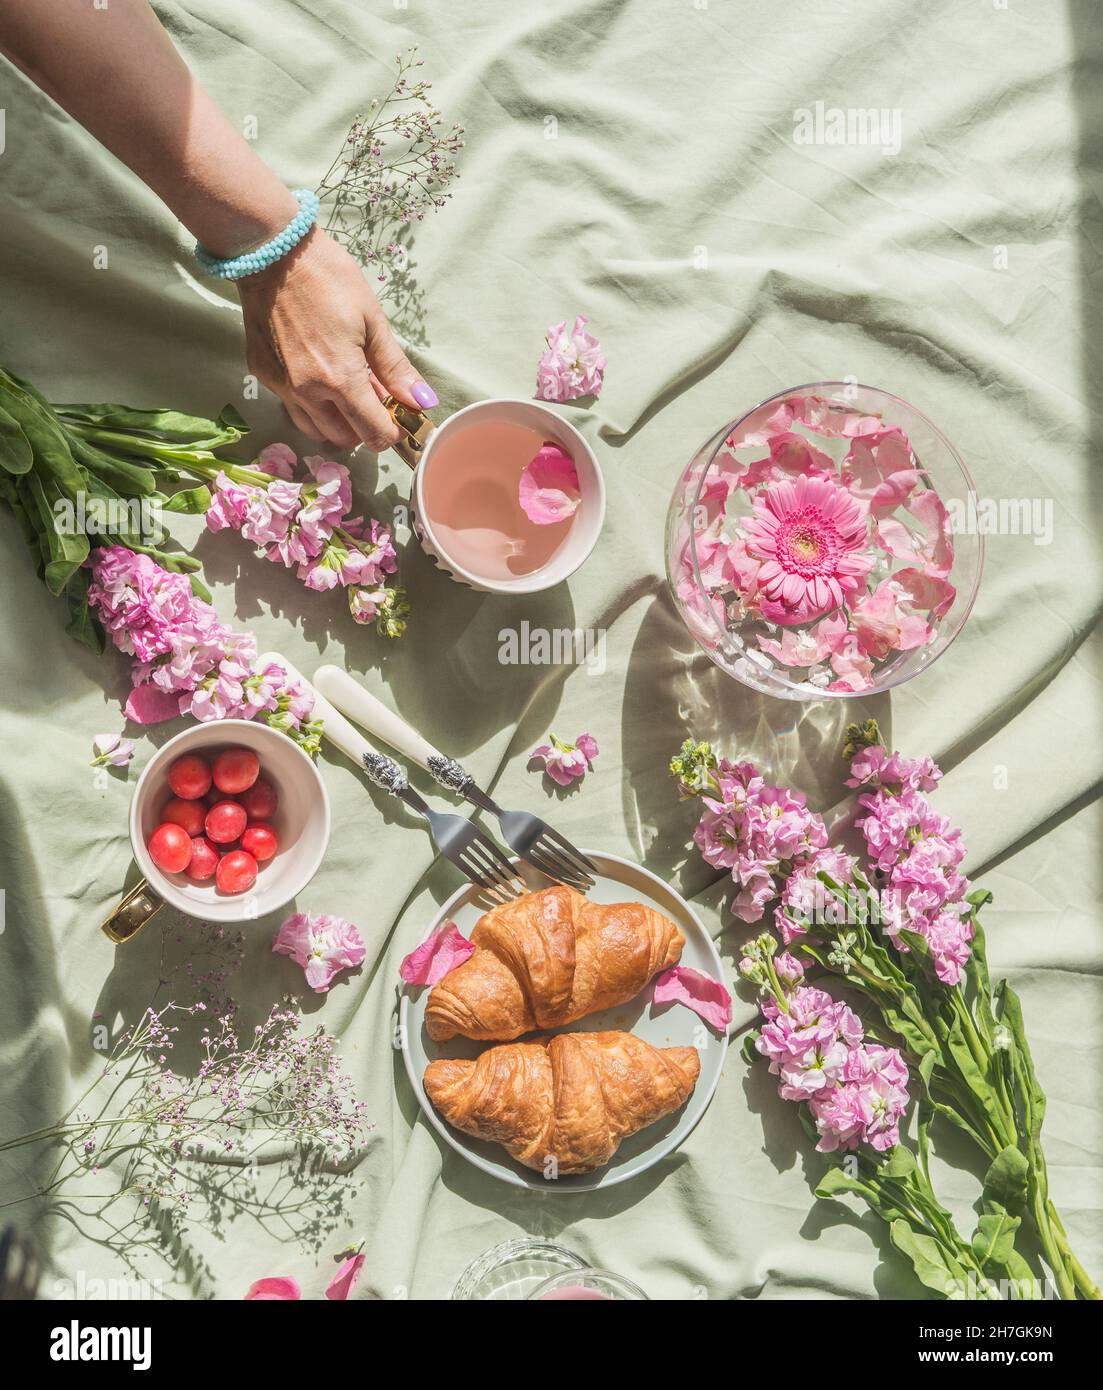 Romantic summer picnic with cherry blossom tea, croissants, cherries and woman hand on pale textile background. Food and drink concept with flowers. T Stock Photo